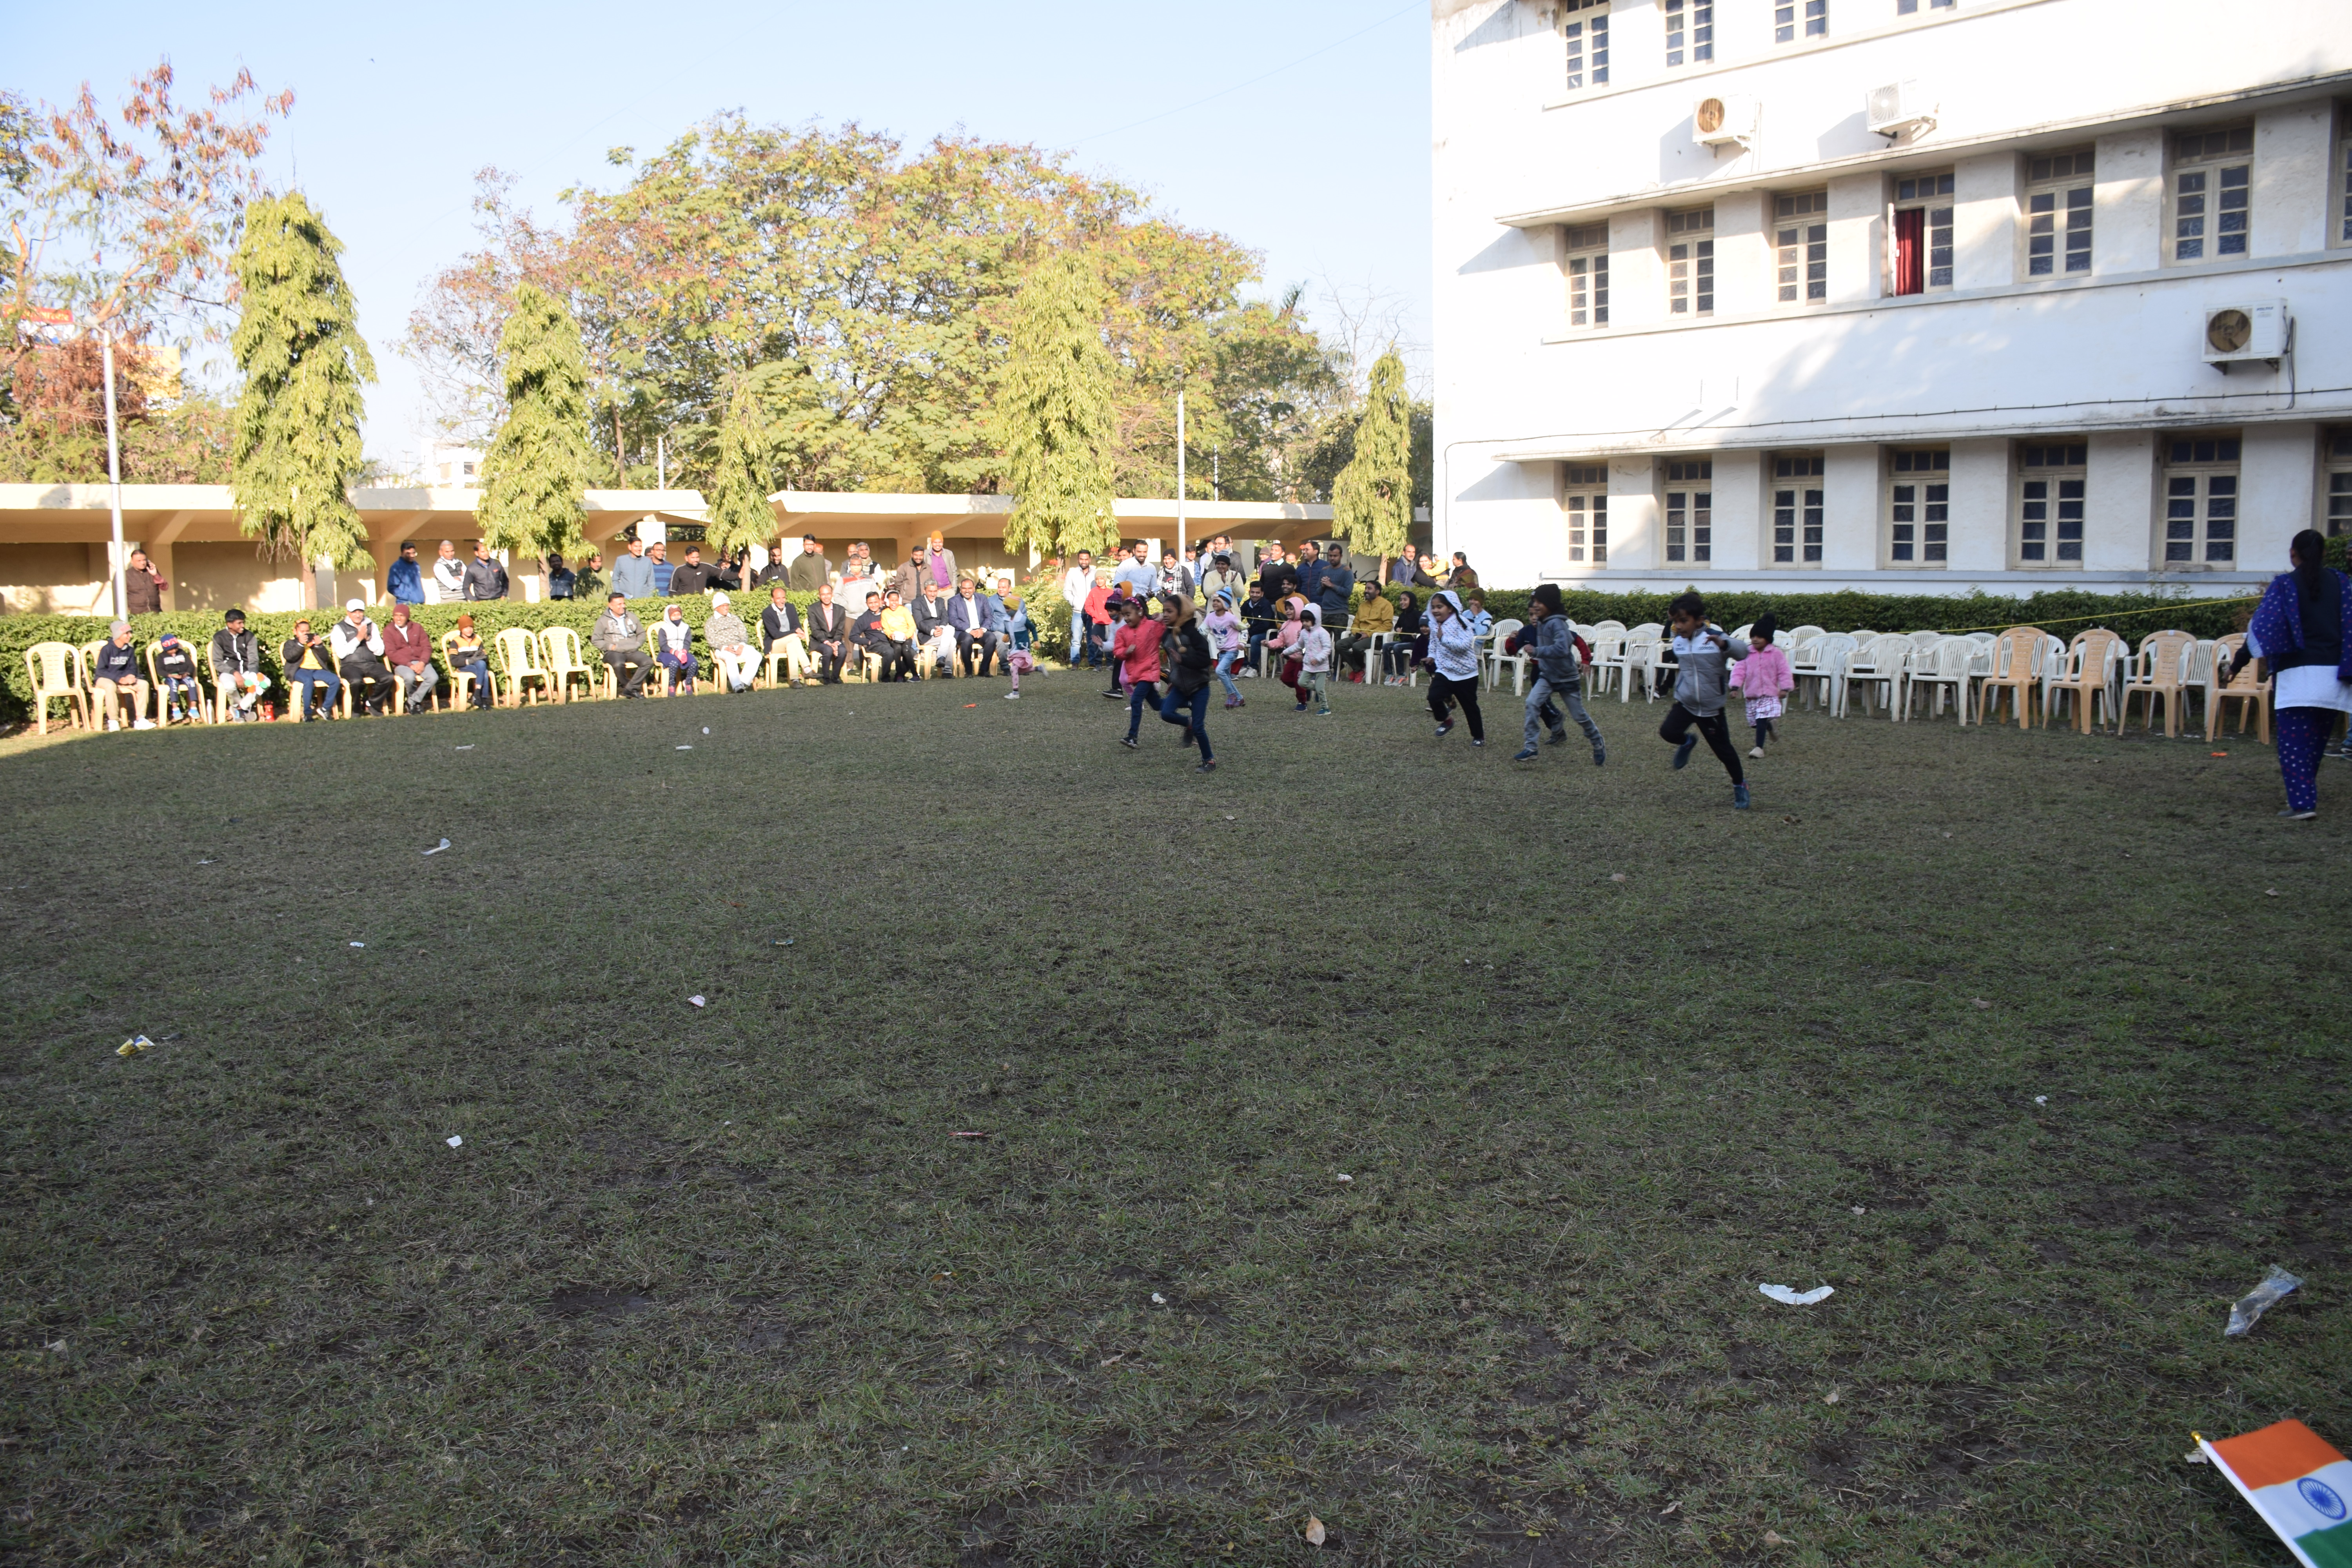 Games on the occasion of Republic Day